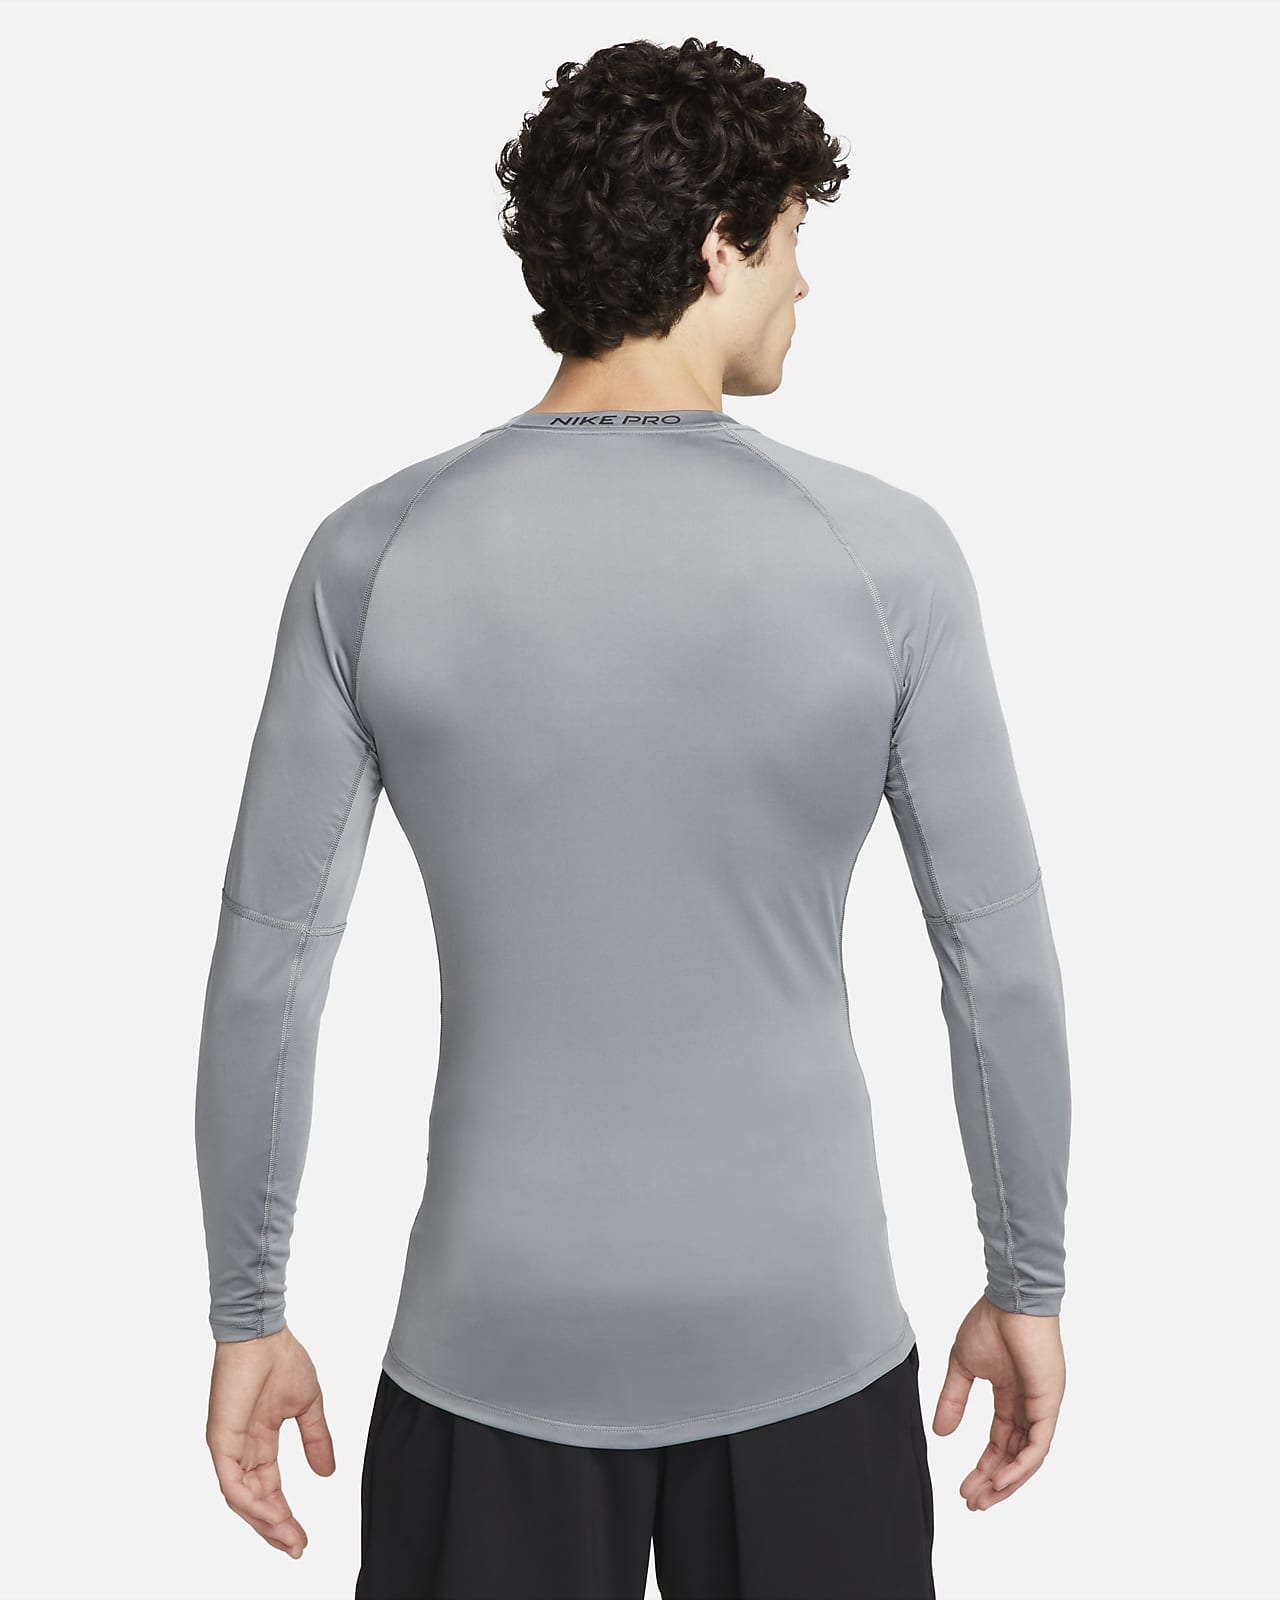 SKINS Men's A200 Long Sleeve Compression Top, Shirts -  Canada